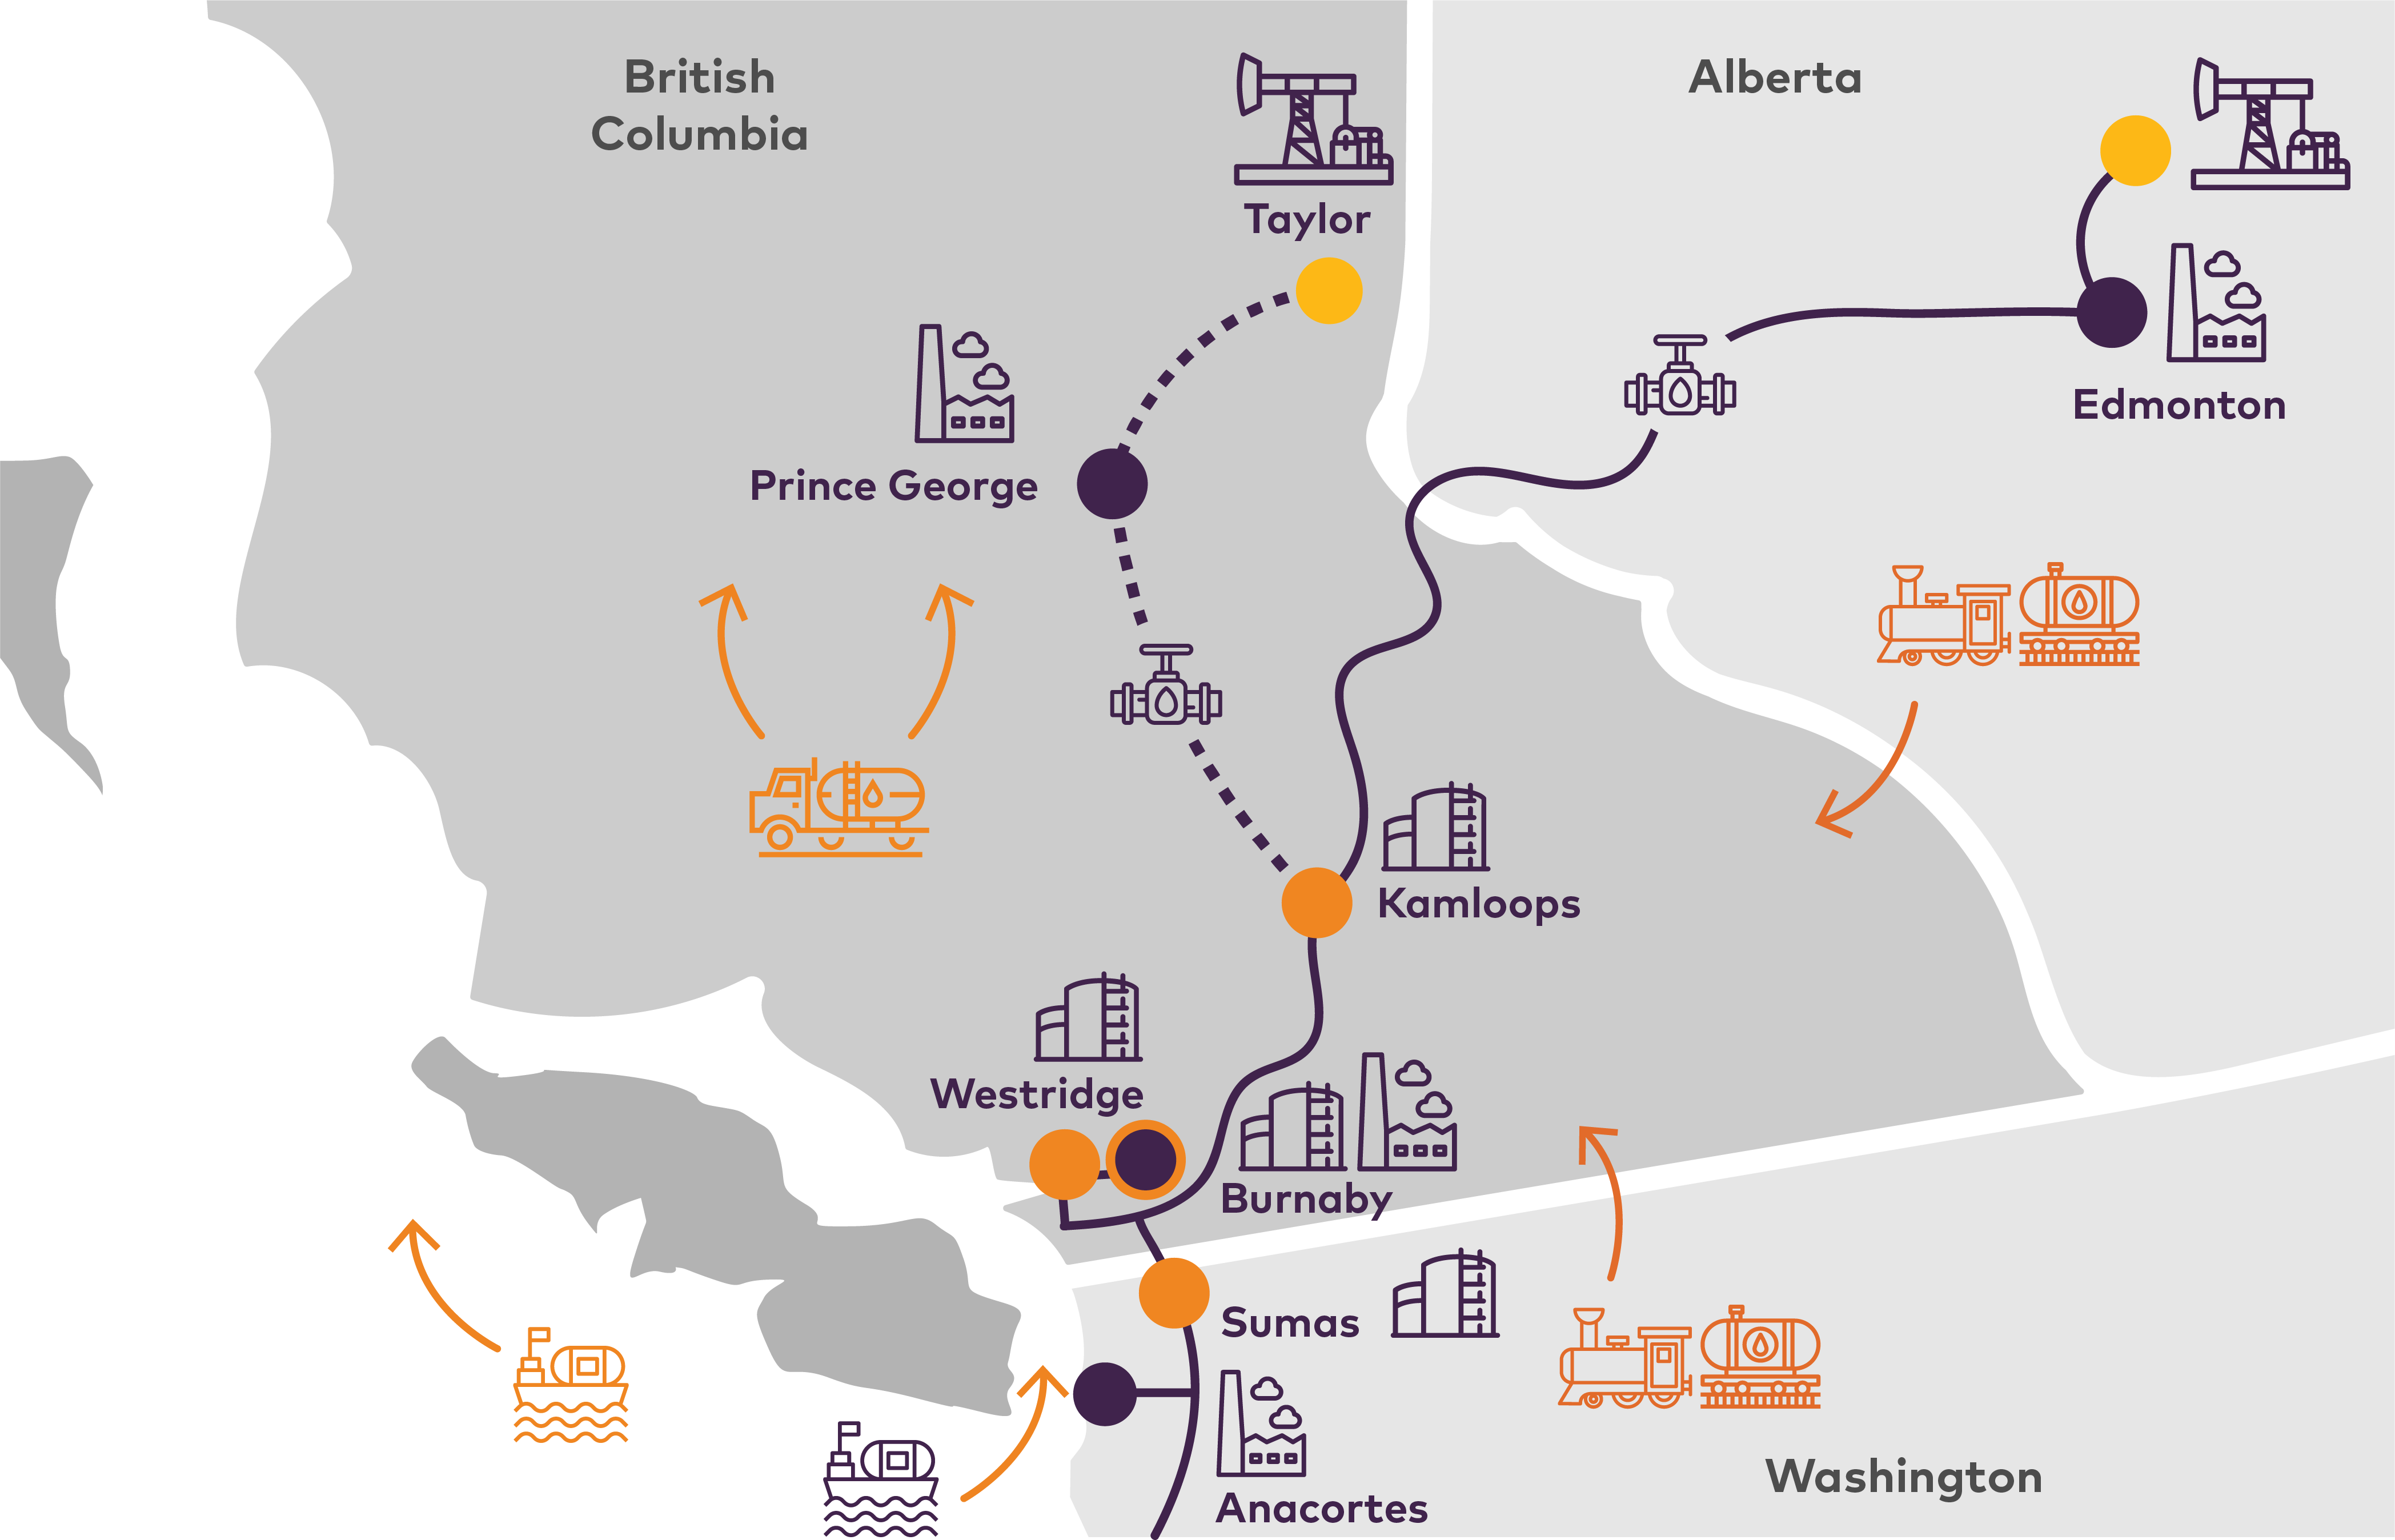 Supply Chain Map of Fuel in BC, Washington, and Alberta